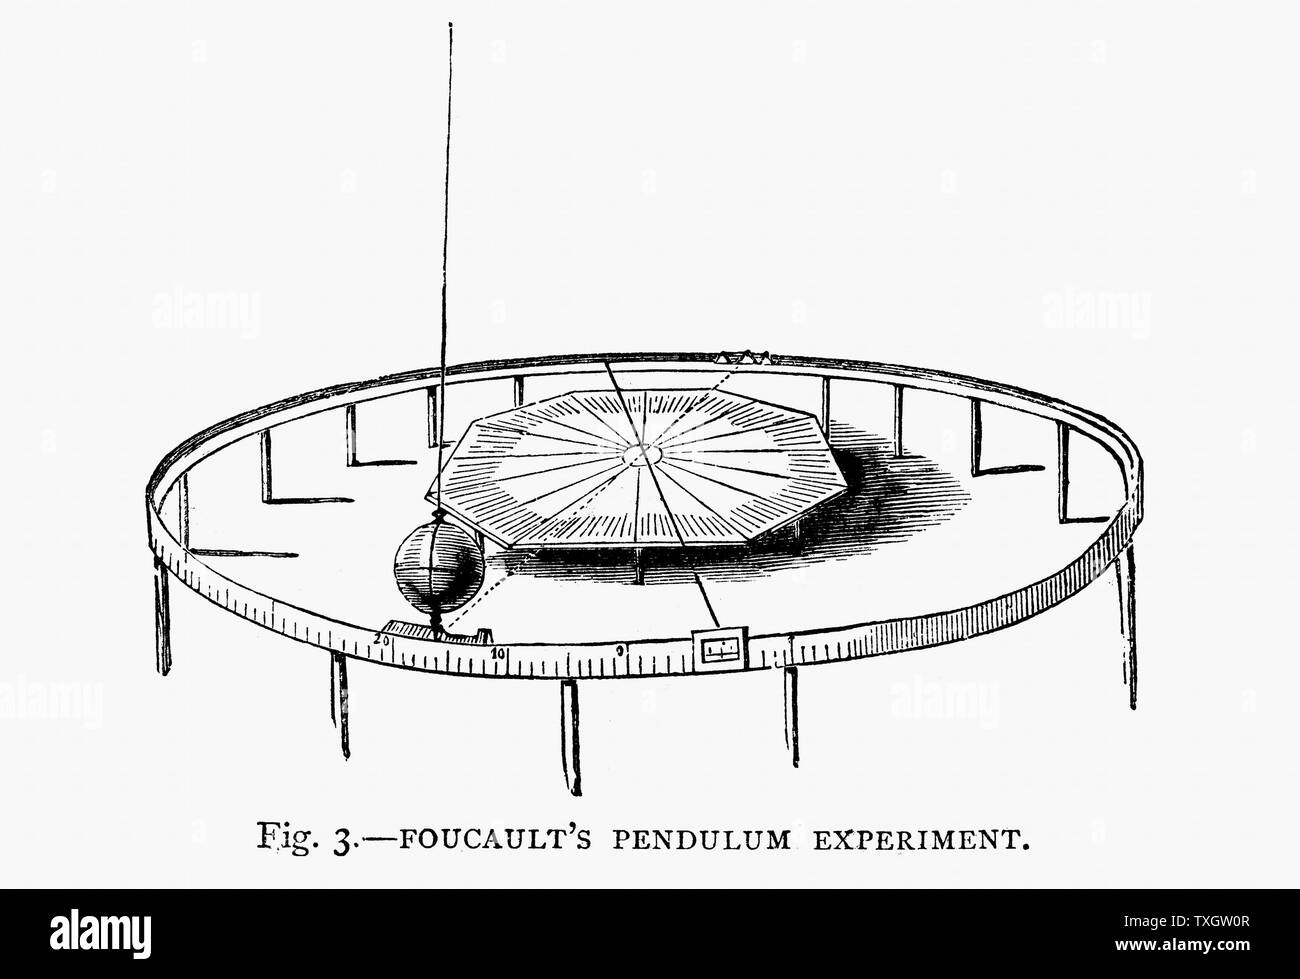 A demonstration of the Earth's rotation using Foucault's pendulum 1881 Wood engraving Stock Photo